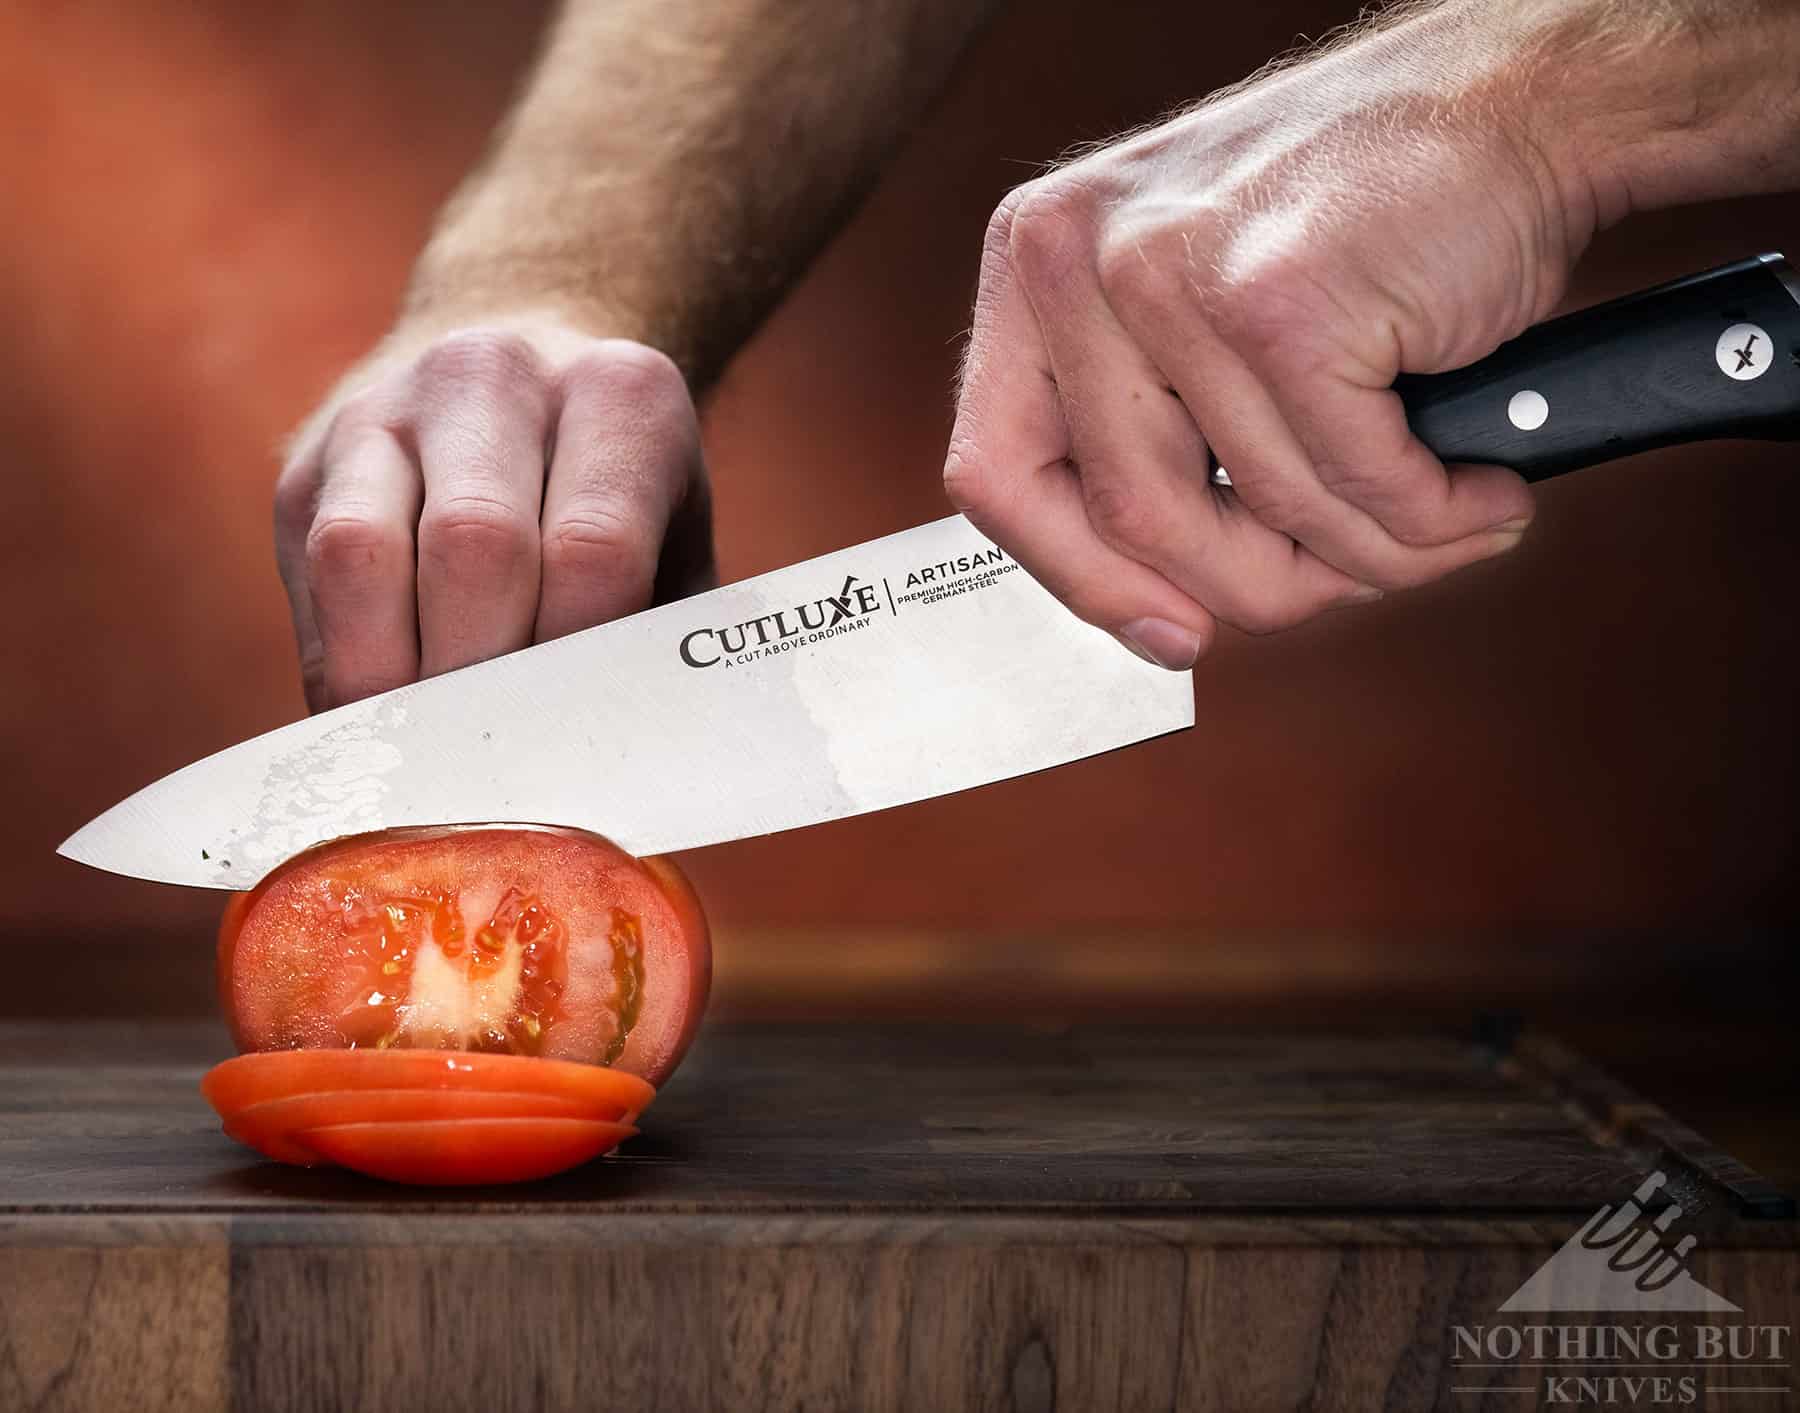 Tactical Kitchen Knives: Carving Beef the Right Way